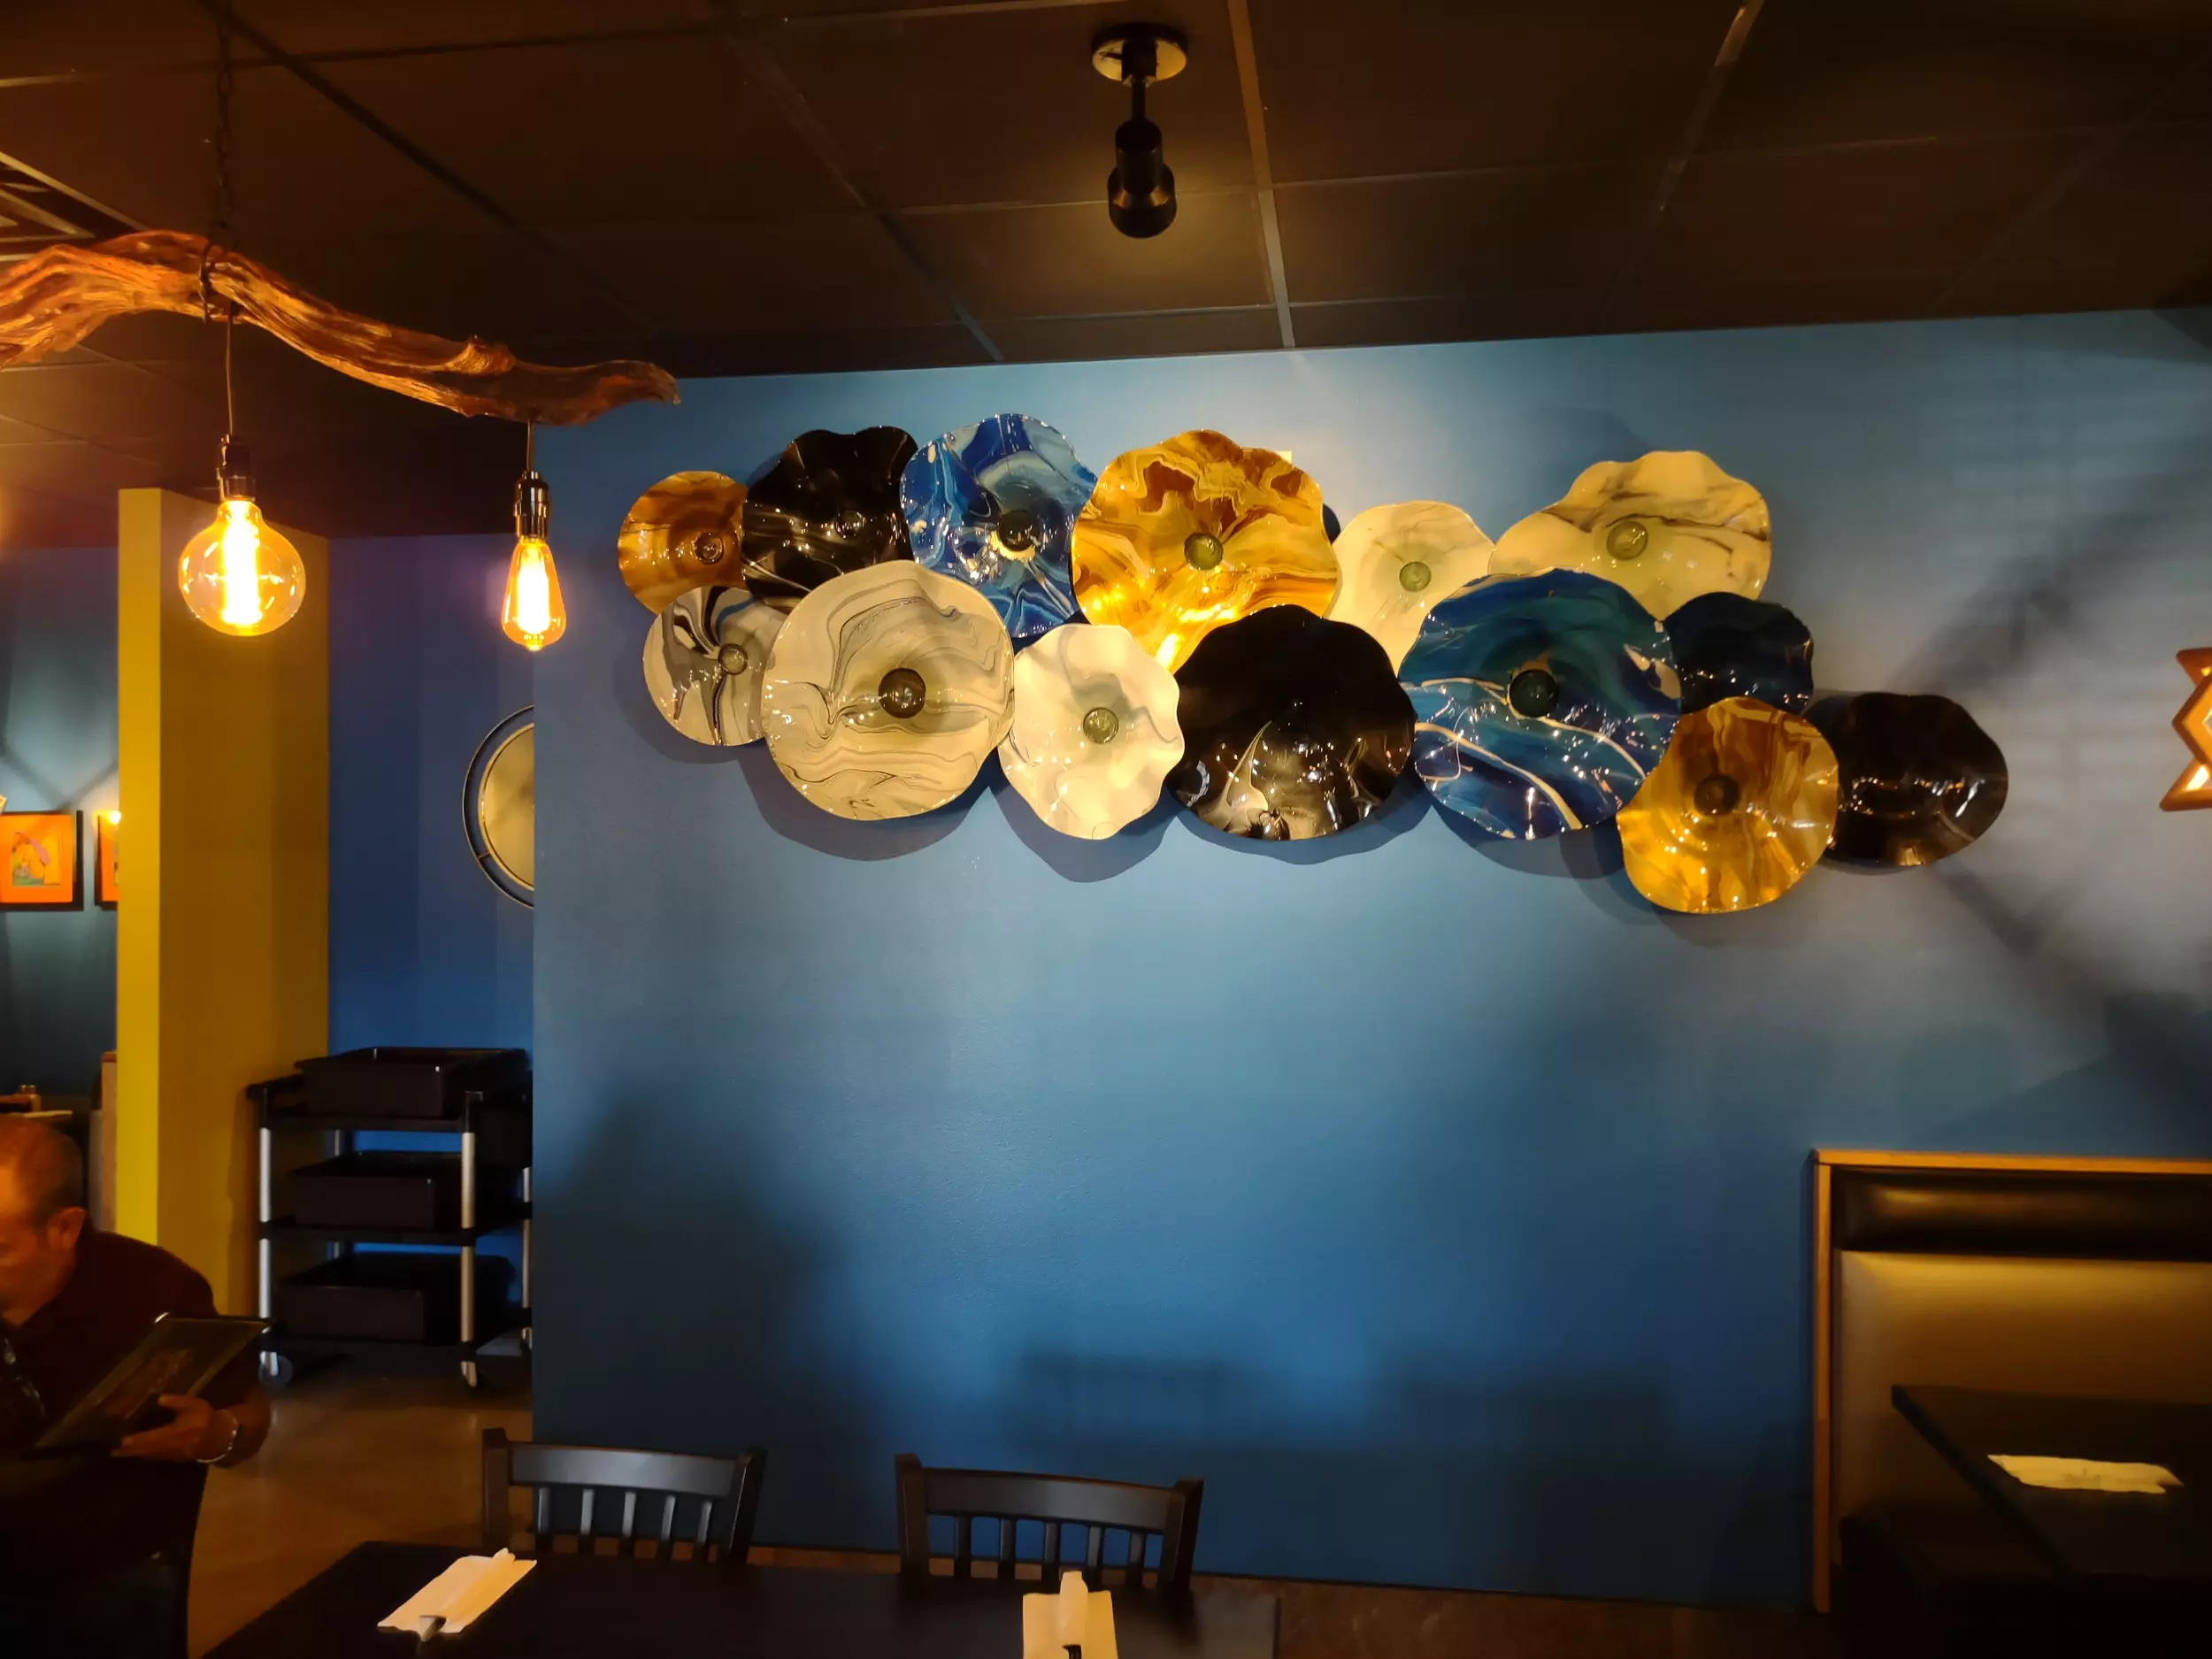 Have you Tried the New Mexican Restaurant in Nash? Now Open